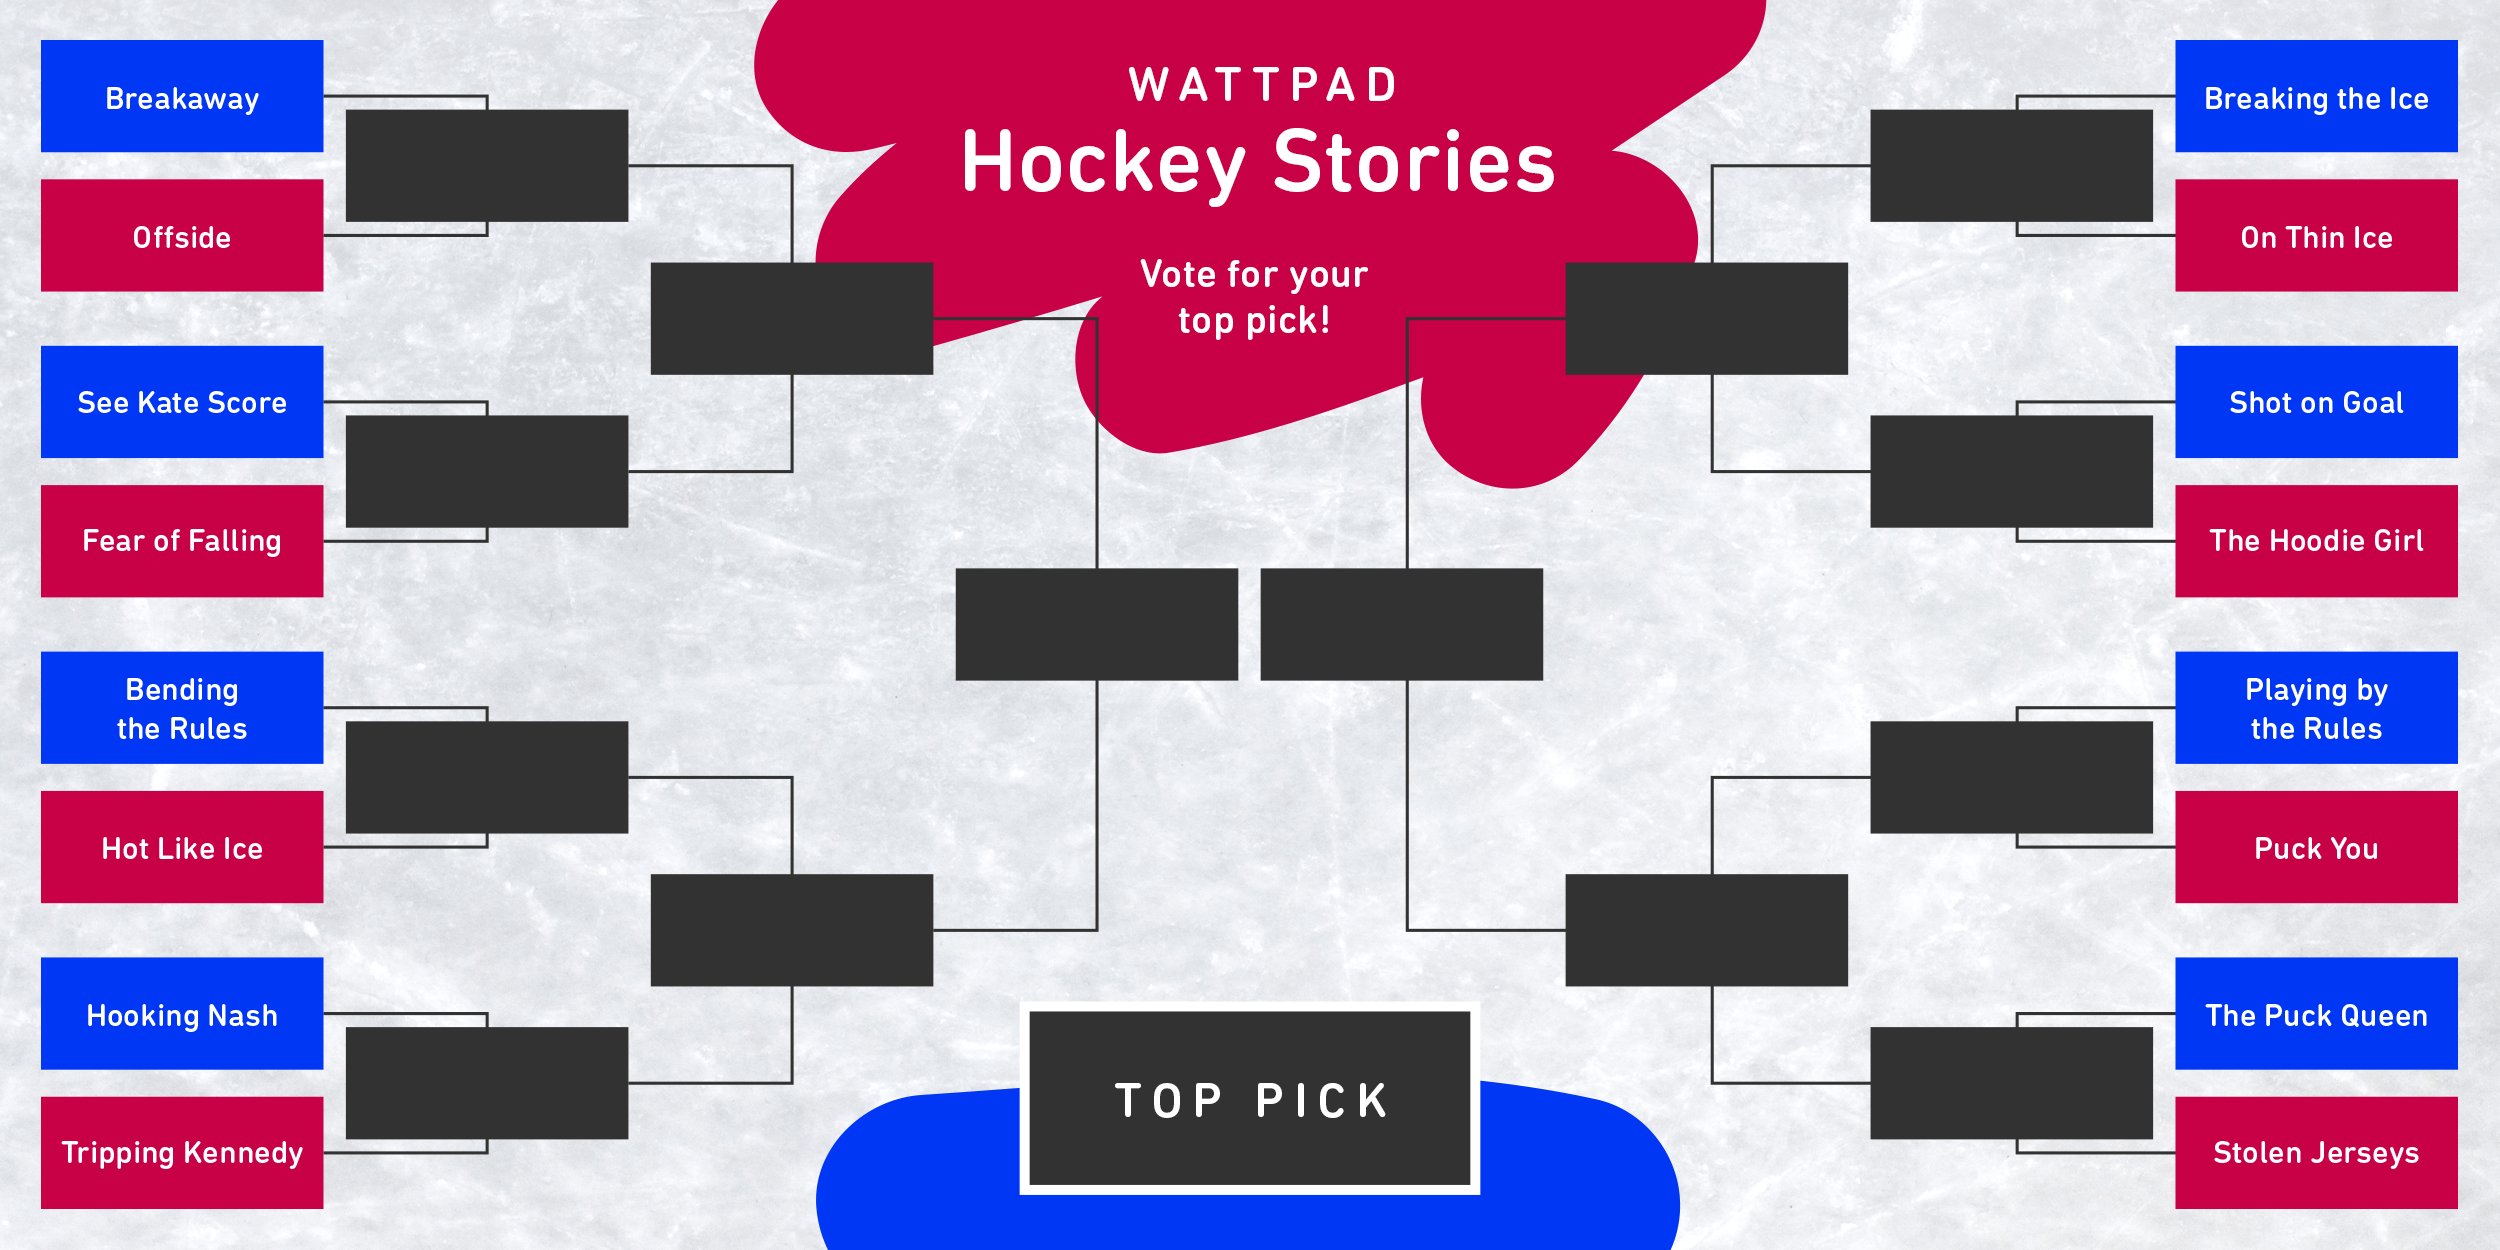 Wattpad on X: The #StanleyCup finals are here! We're putting some